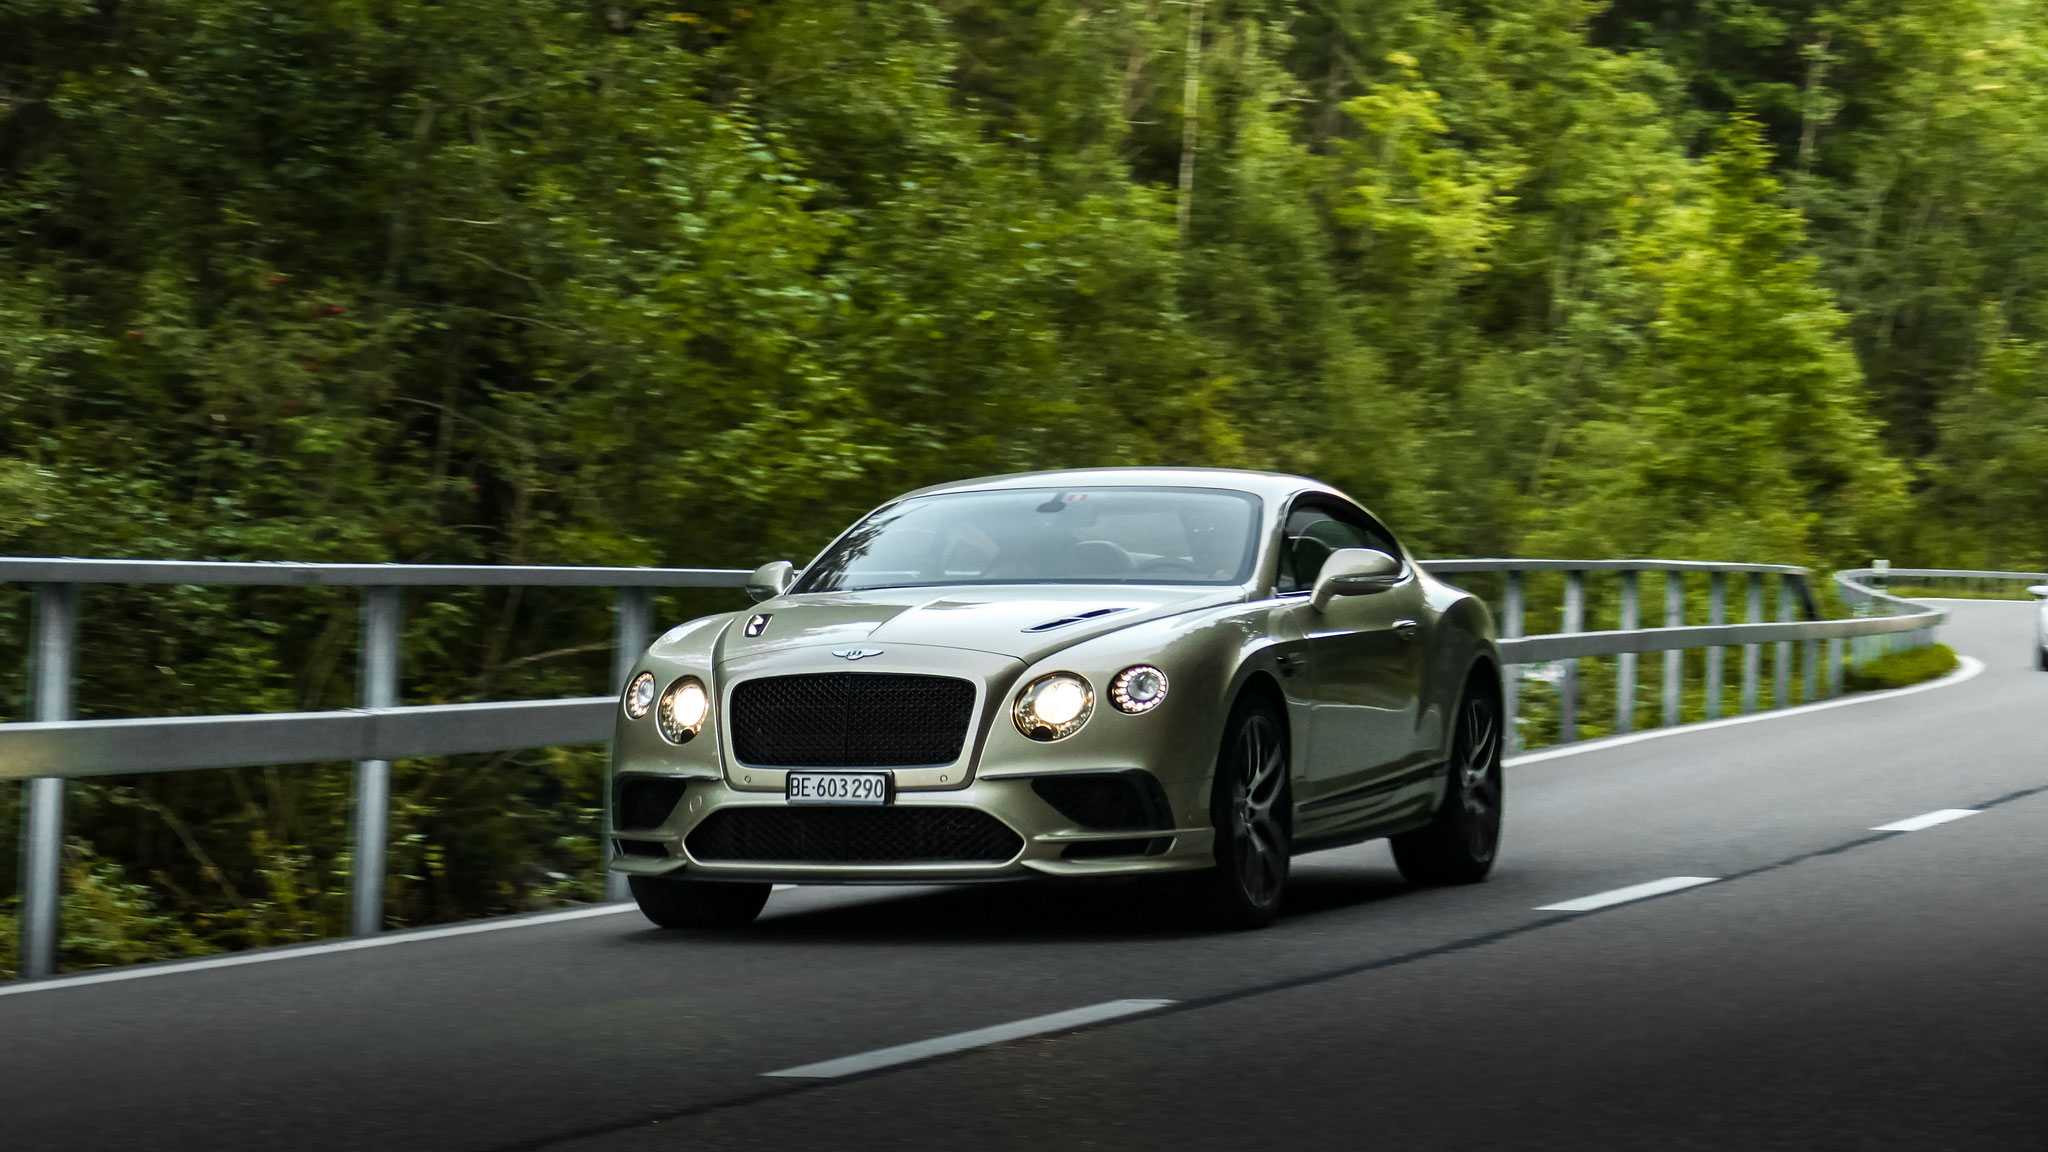 Bentley Continental GT Supersports - BE-603290 (CH)